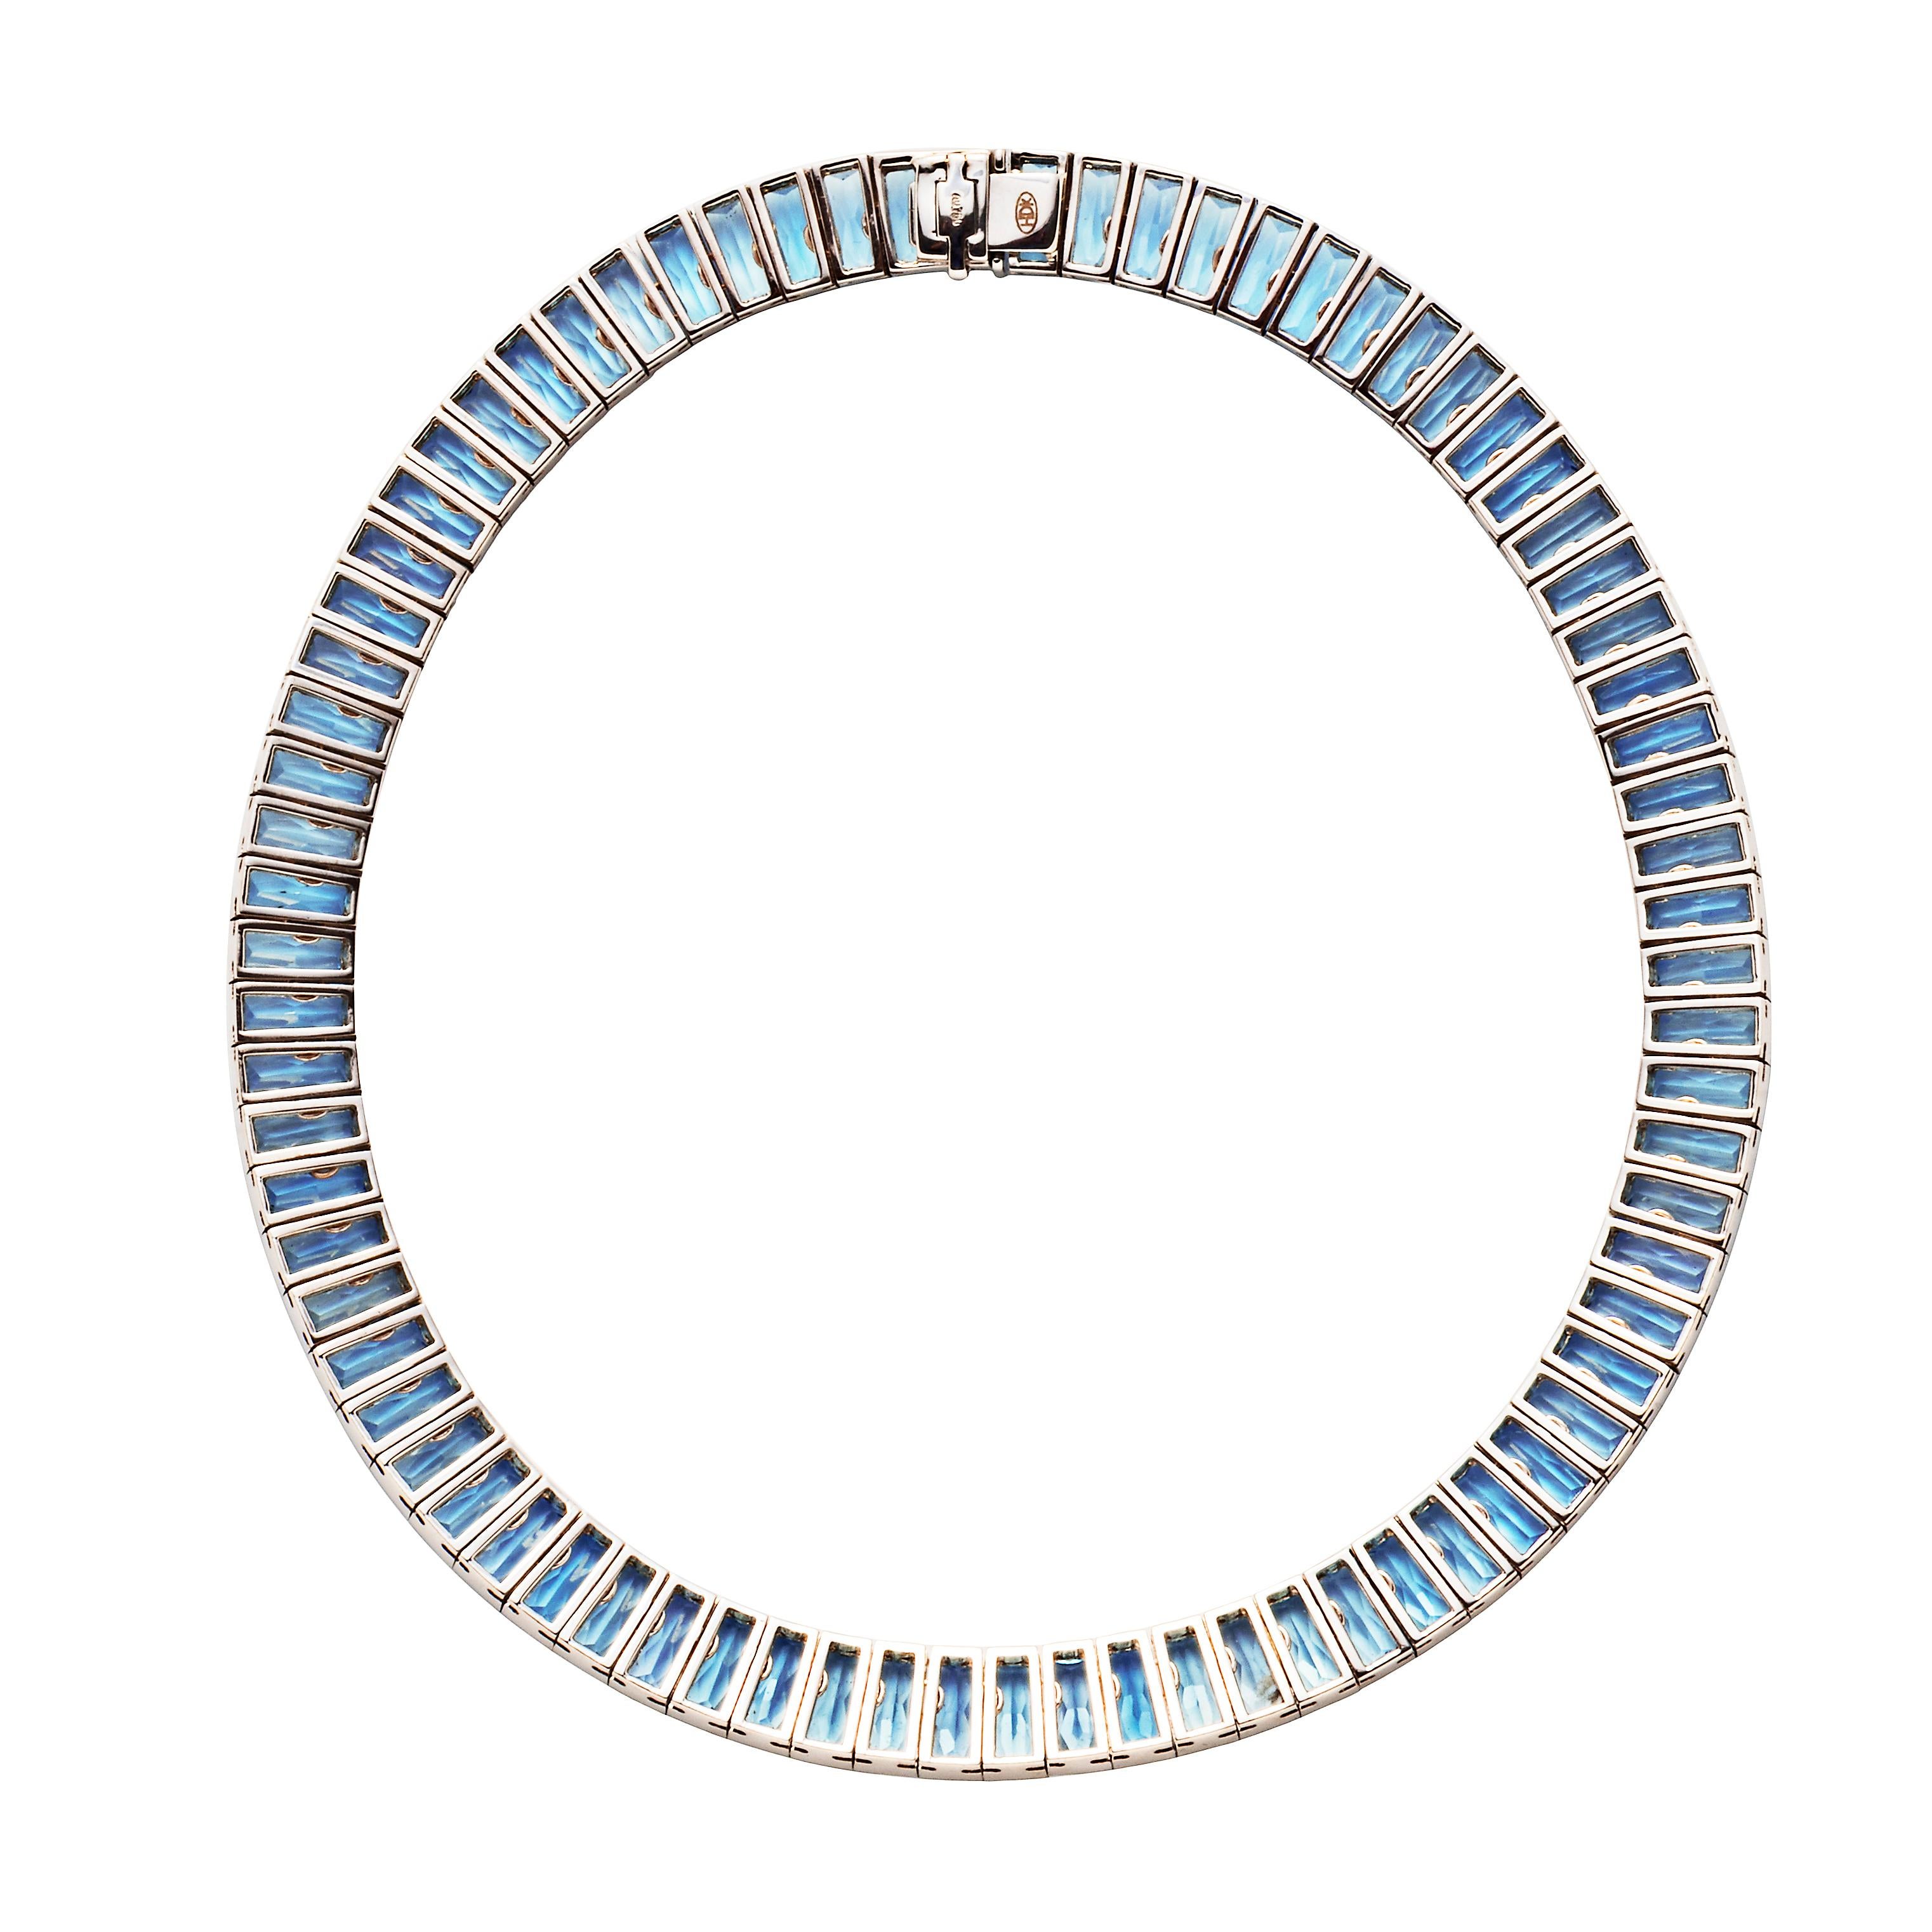 Set with a cascade of 78 fancy-cut blue topazes that weigh a staggering 200 carats, this refined necklace comes from the workshops of Hans D. Krieger, a German jeweler with over 300 years of history. The firm is known for their expert craftsmanship,